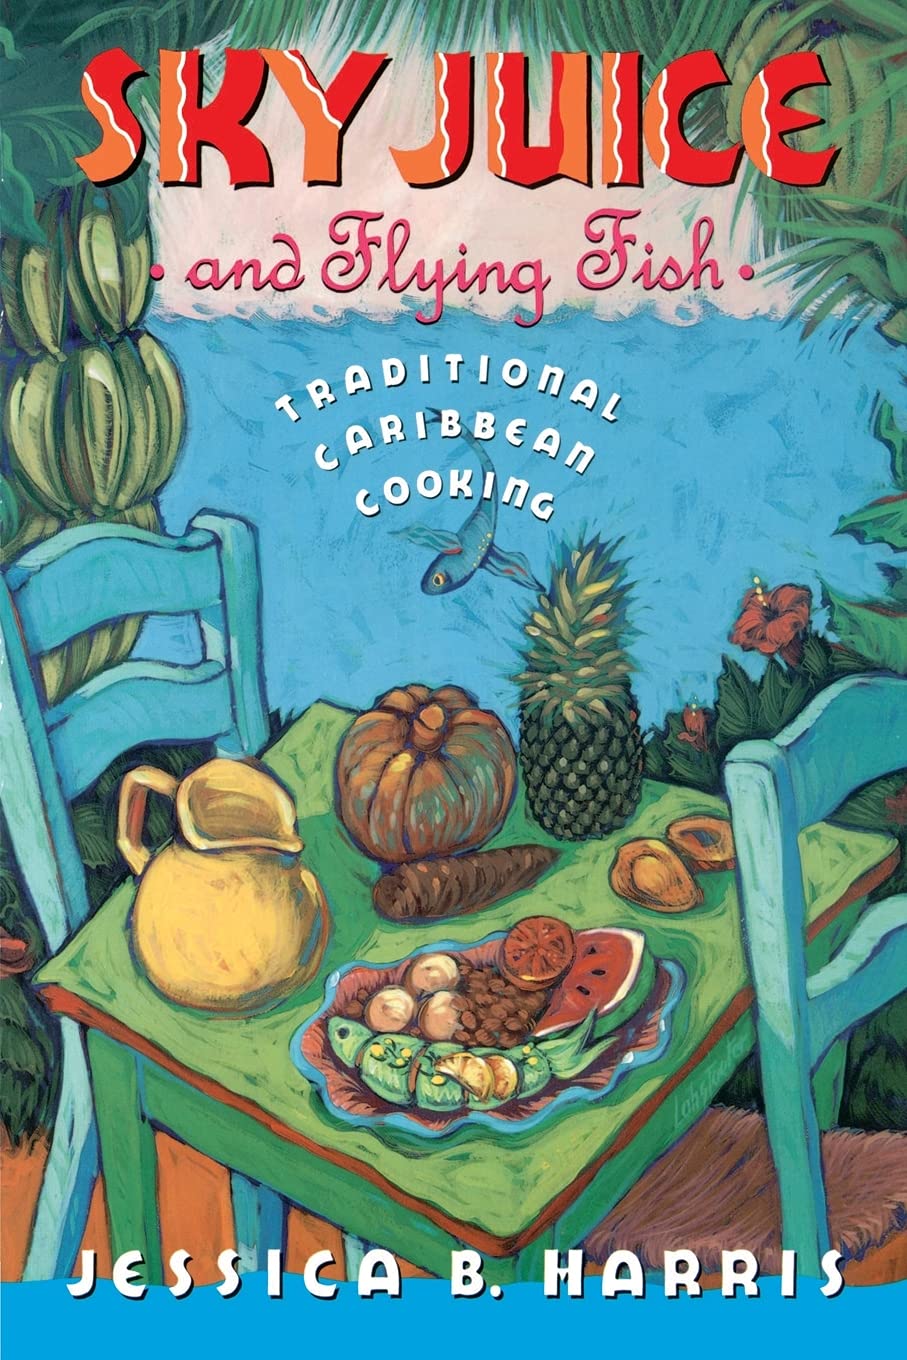 Sky Juice and Flying Fish: Traditional Caribbean Cooking (Jessica B. Harris)